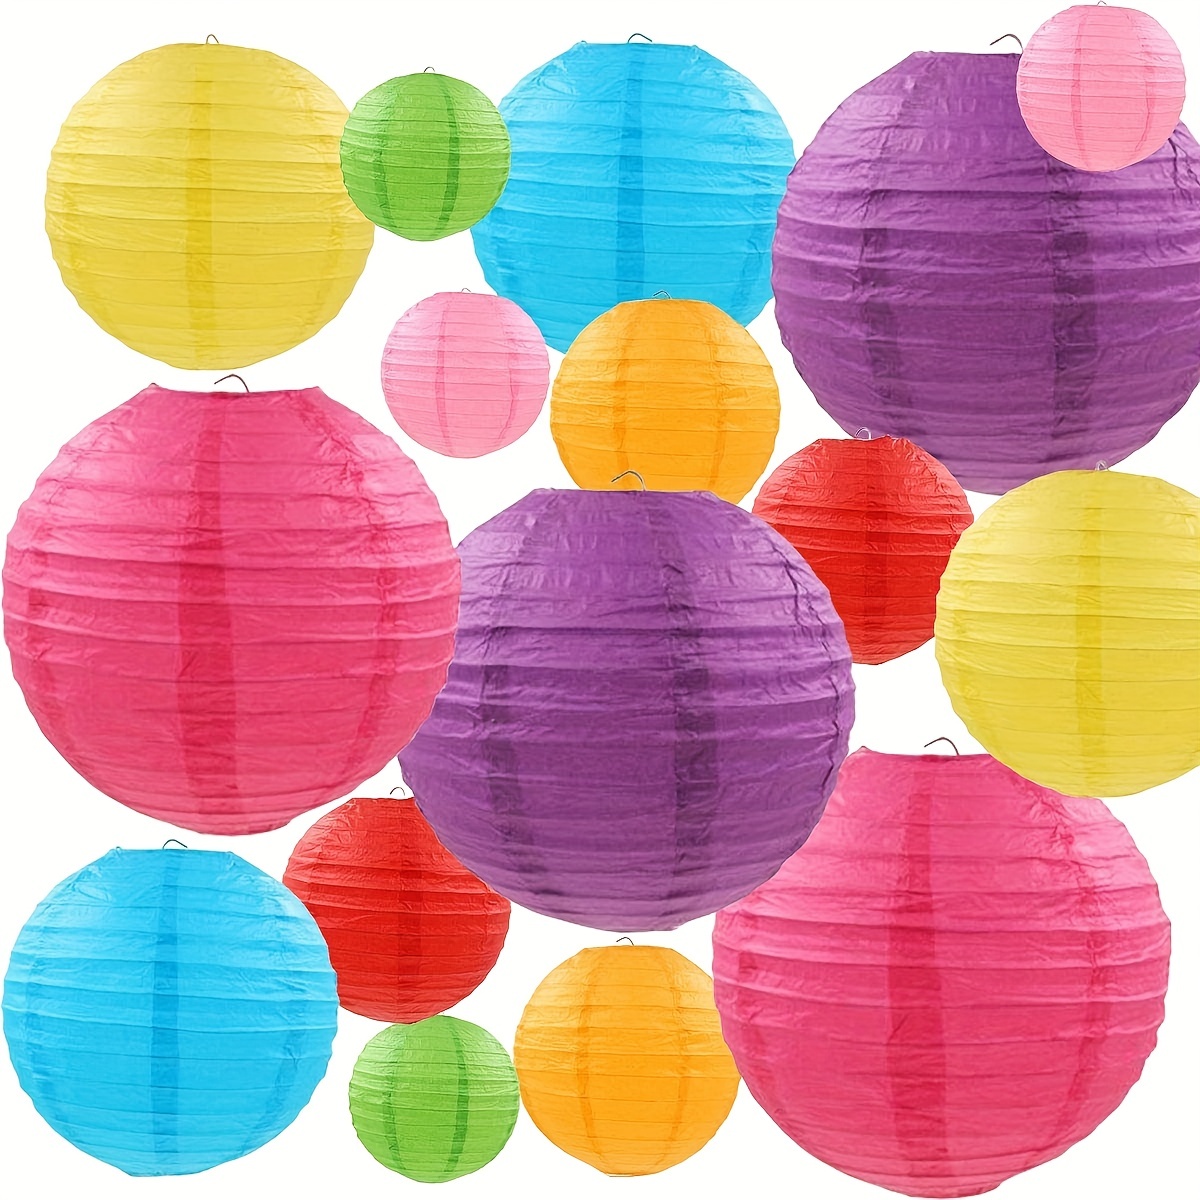 5 PACK  12 Inch Peach / Orange Coral Even Ribbing Round Paper Lantern,  Hanging Combo Set -  - Paper Lanterns, Decor, Party  Lights & More